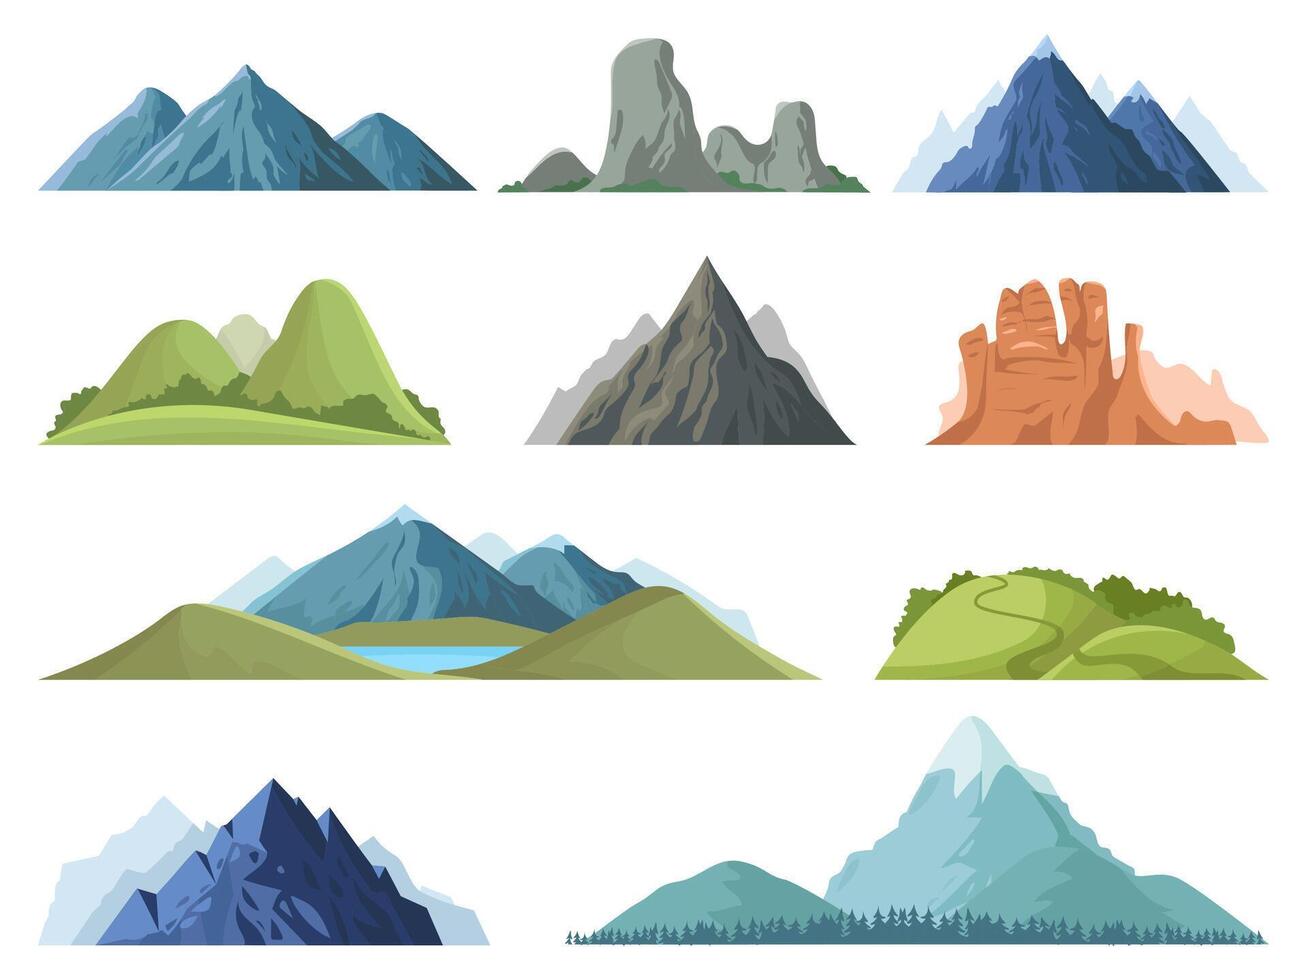 Rocky mountains. Mountain tops outdoor landscape, winter peaks, hilltop with trees, hiking mountain valley landscape vector illustration set